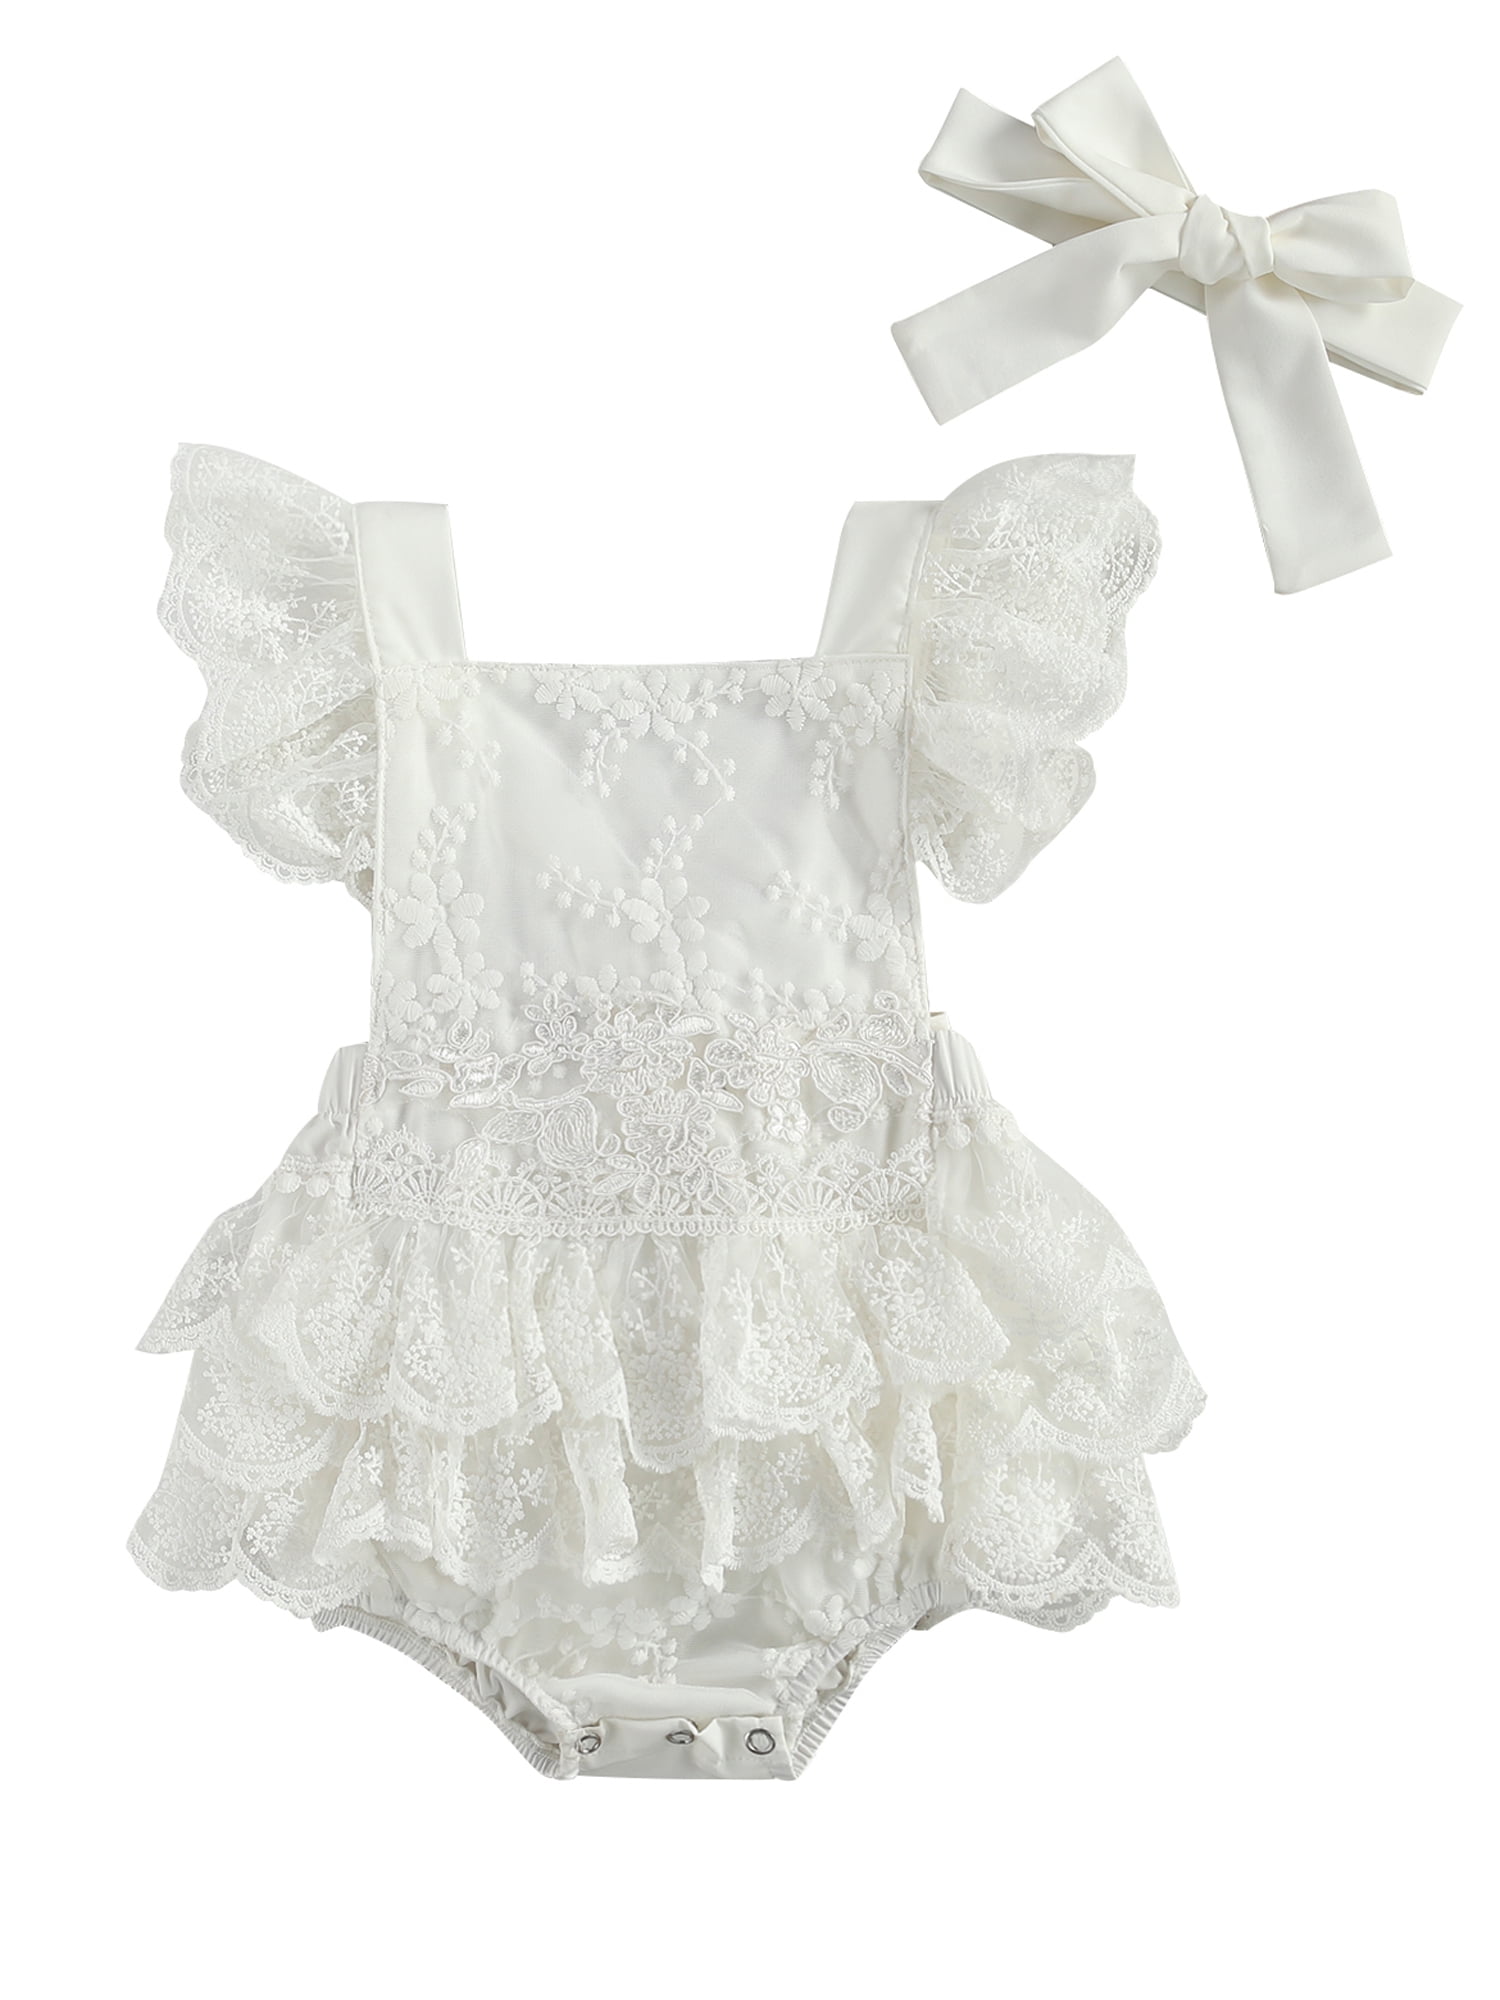 Details about   Newborn Baby Girl Clothes Lace Floral Romper Backless Bodysuit Photo Prop Outfit 